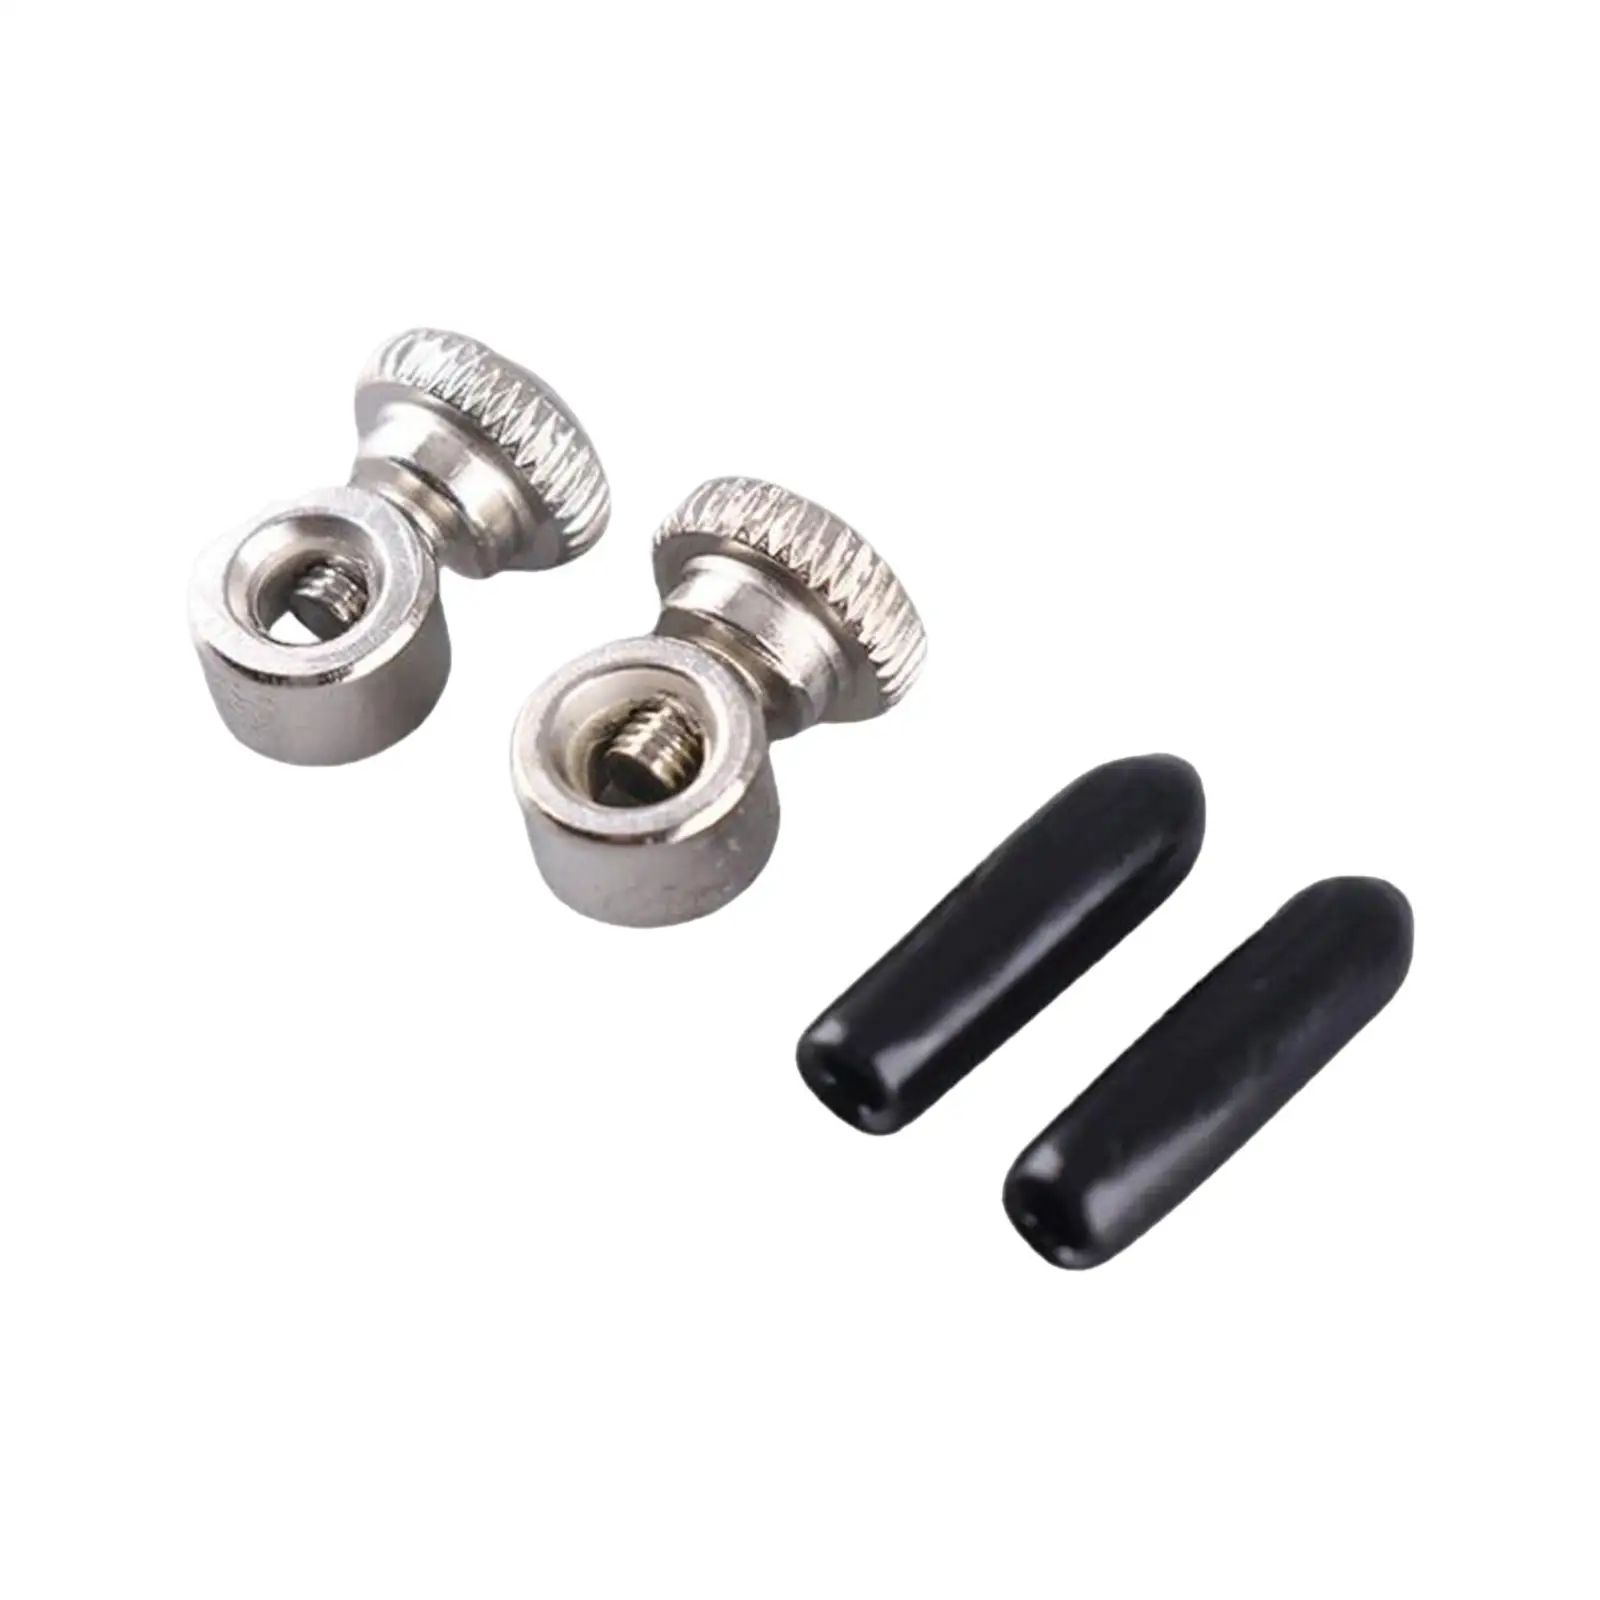 2 Pair Jumping Rope Screws End Caps Set Accessories for Weight Skip Rope